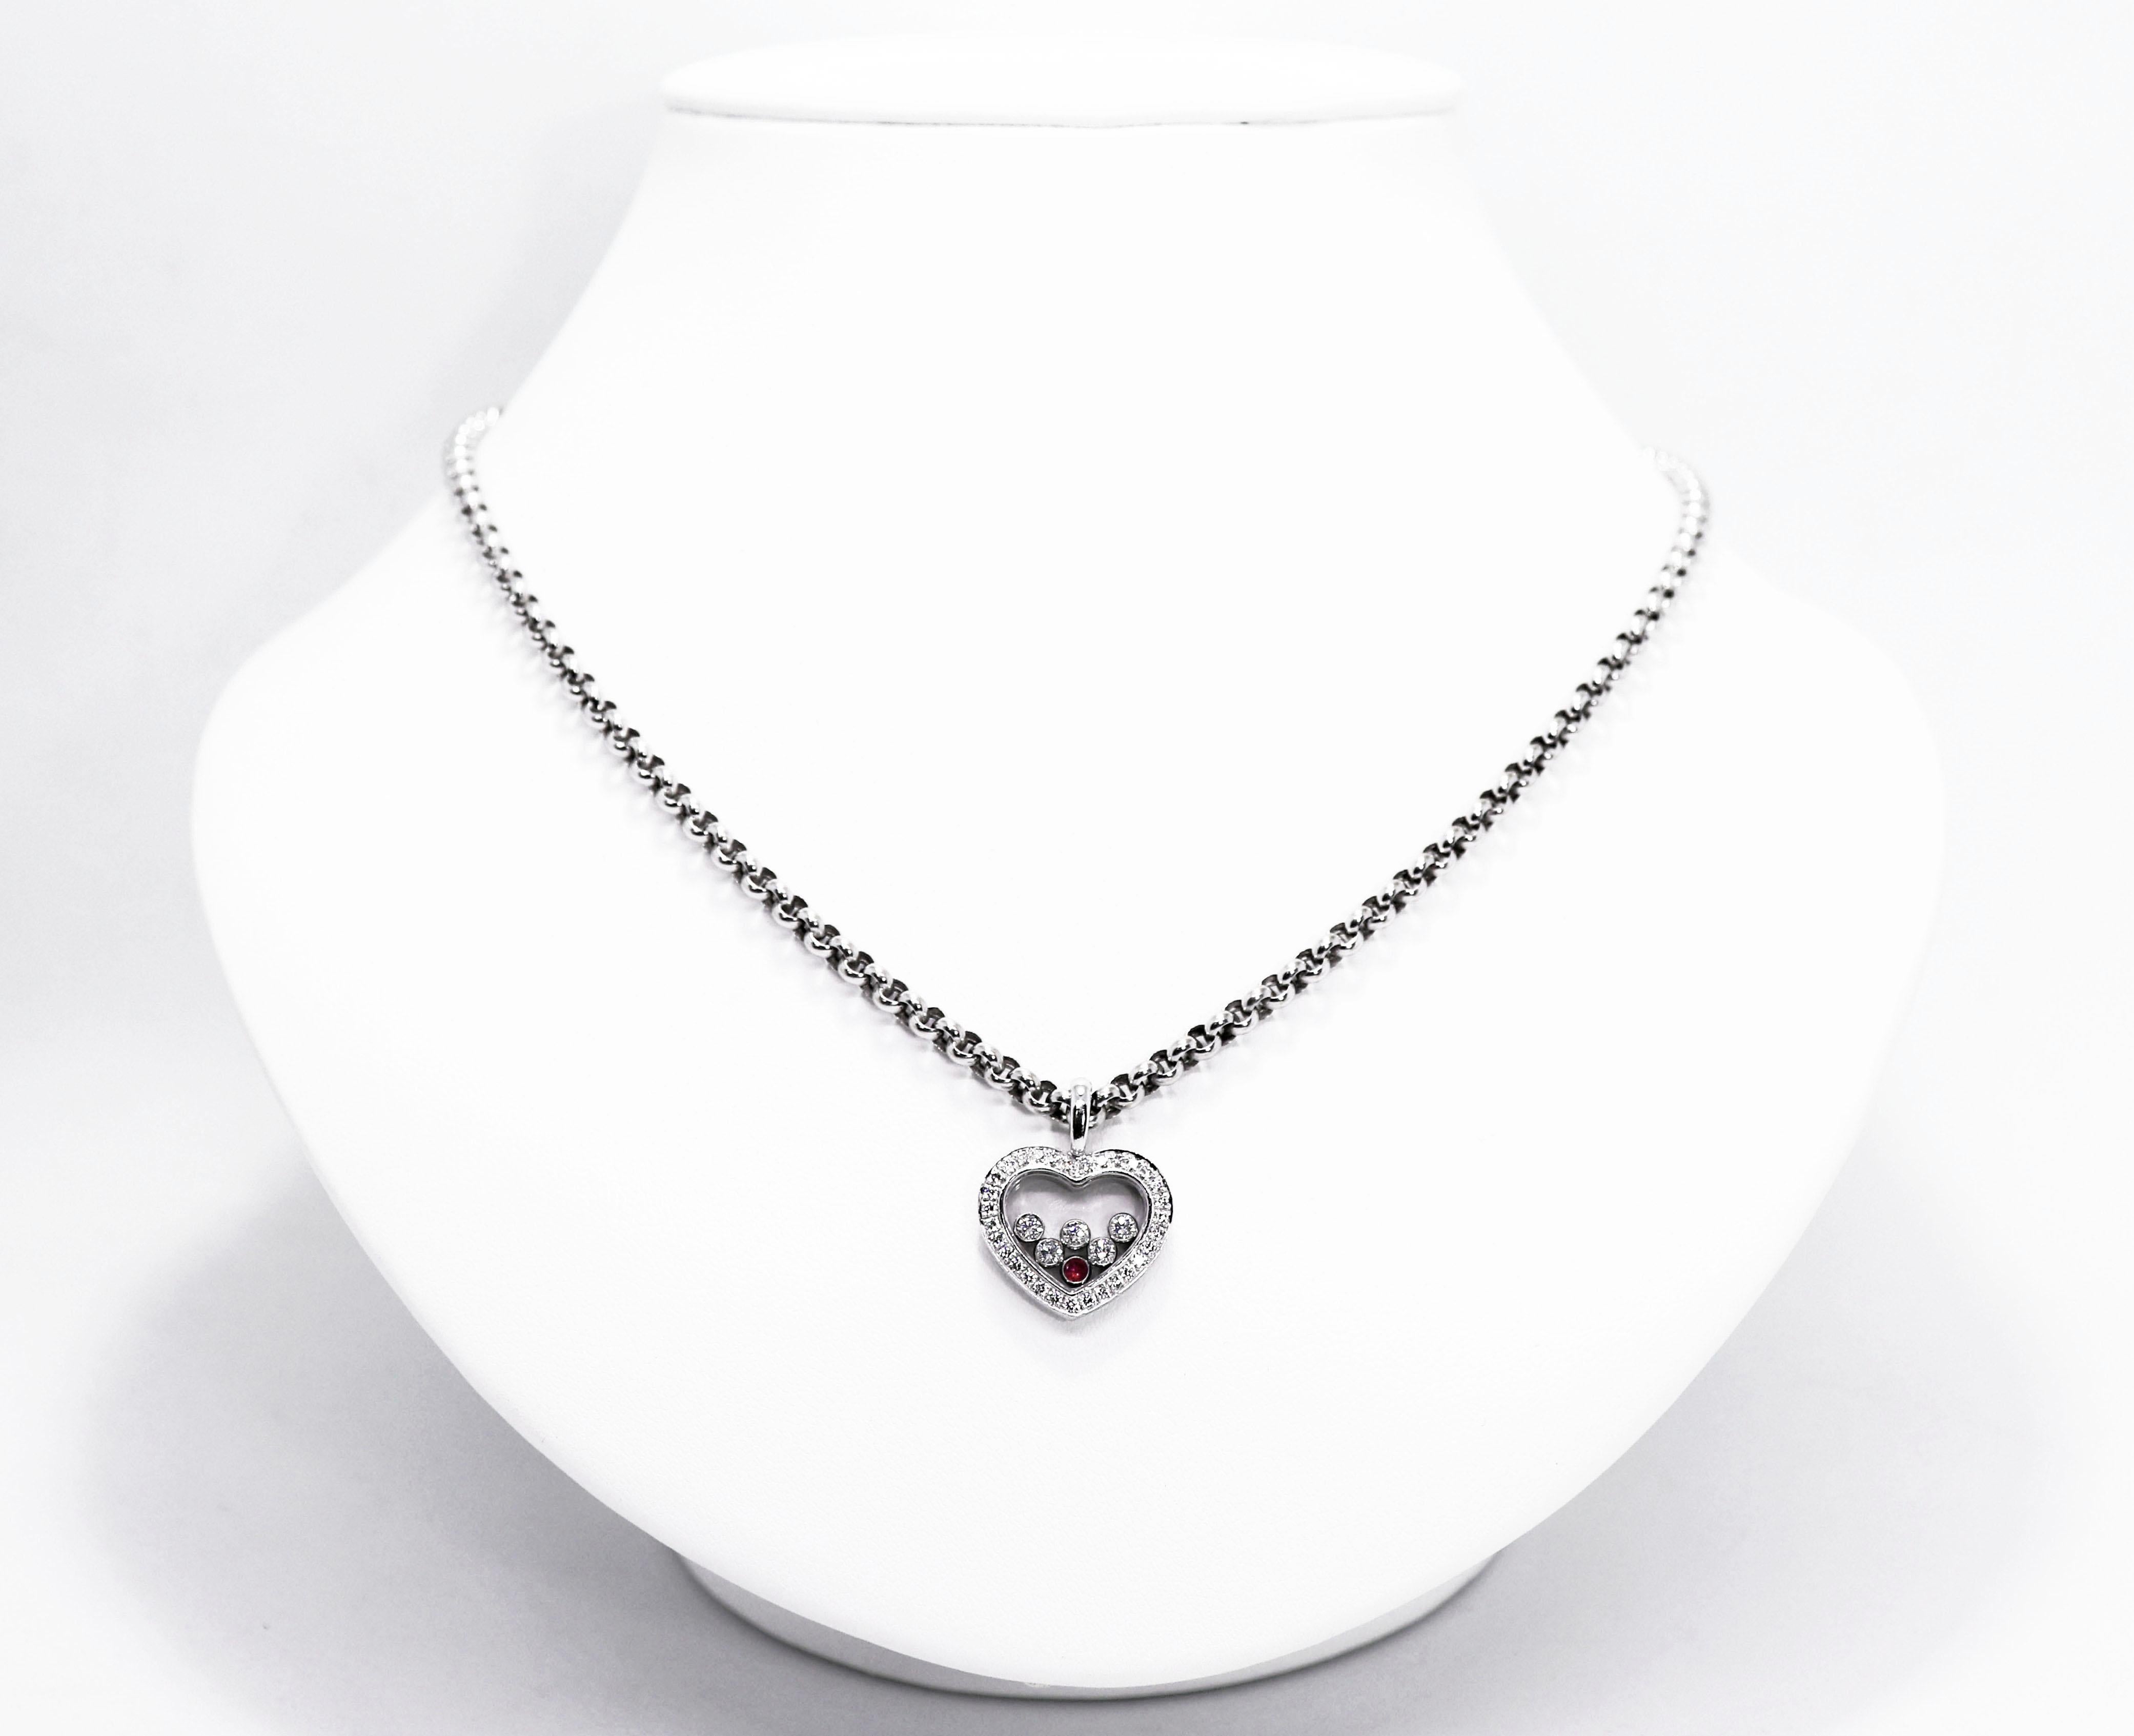 Beauitul heart shaped pendant from Chopard's signature Happy Diamond collection pavé set with 31 round brilliant cut diamonds weighing a total of 0.26 carat. The pendant features 5 freely-moving round brilliant cut diamonds totalling to 0.28 carat